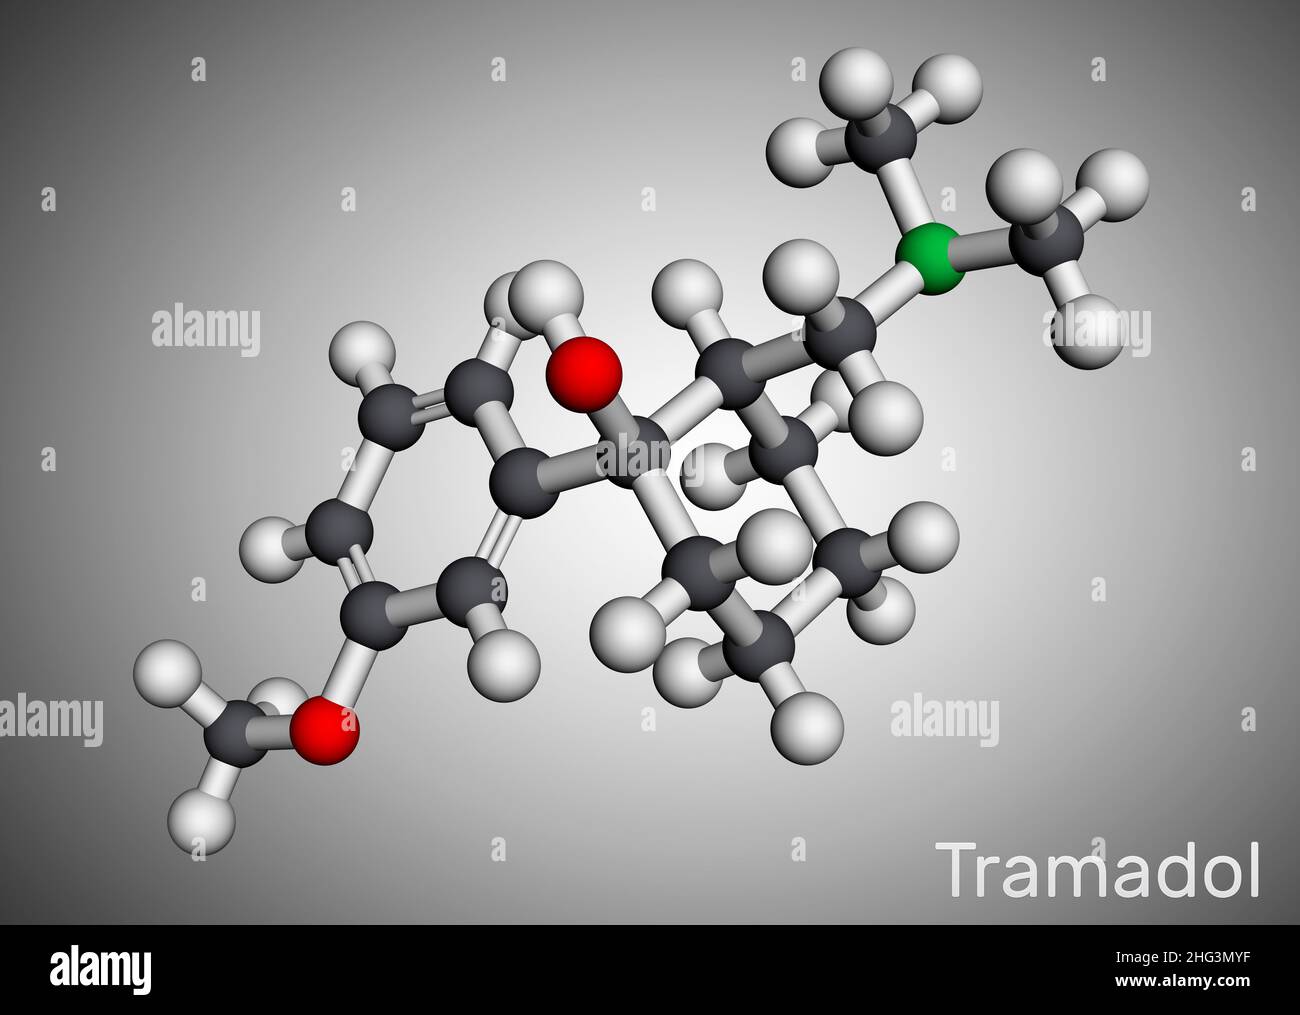 Tramadol molecule. It is synthetic psychotropic opioid analgesic, used for the therapy of severe pain. Molecular model. 3D rendering. Illustration Stock Photo